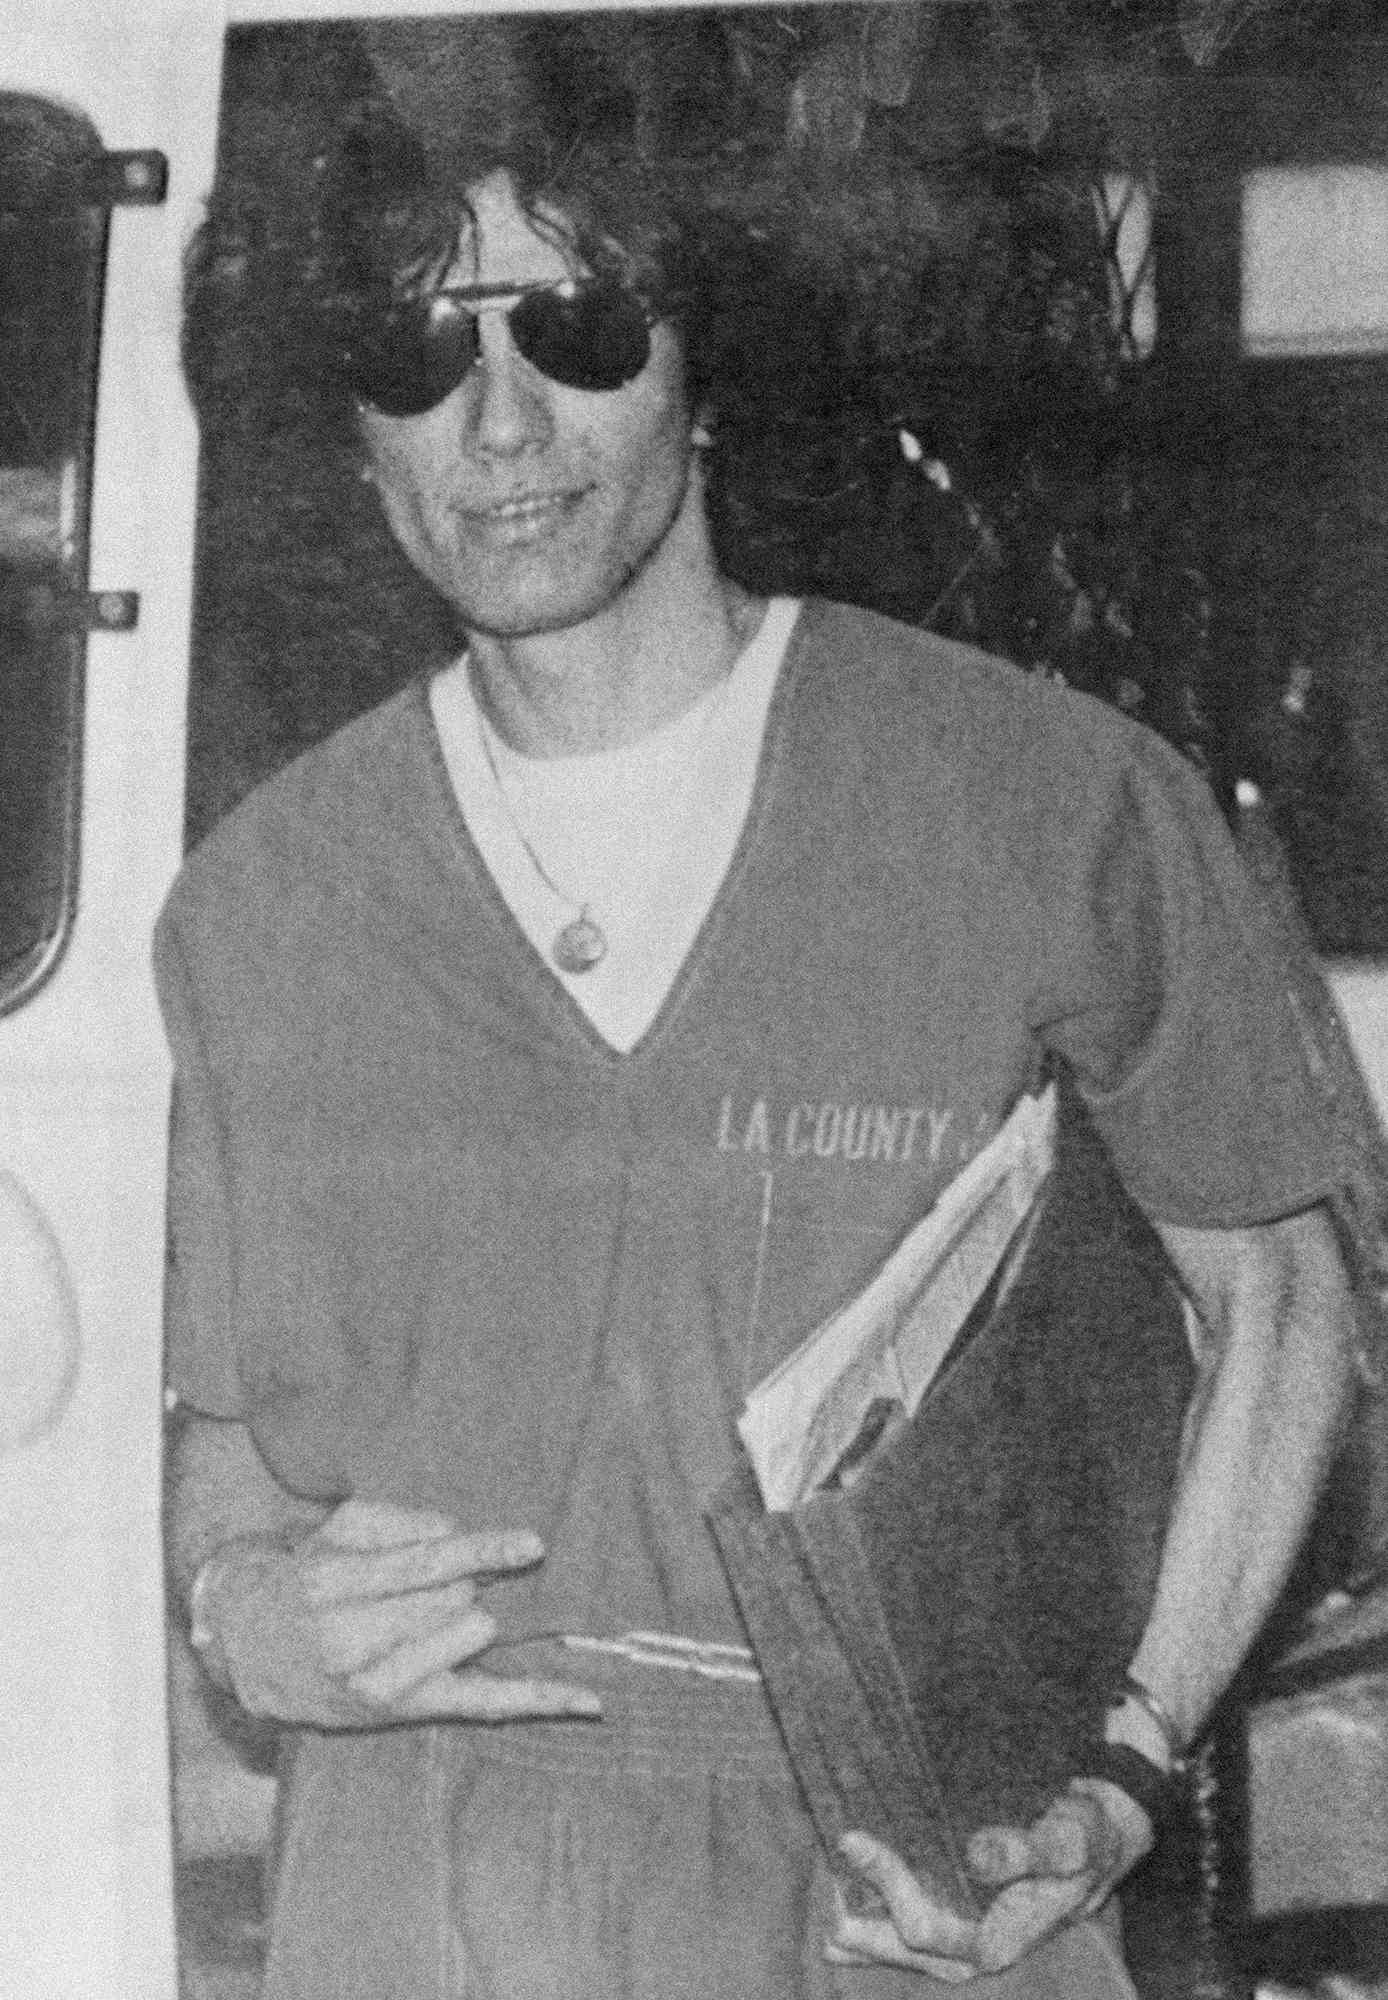 Richard Ramirez is led from the courthouse following his conviction.